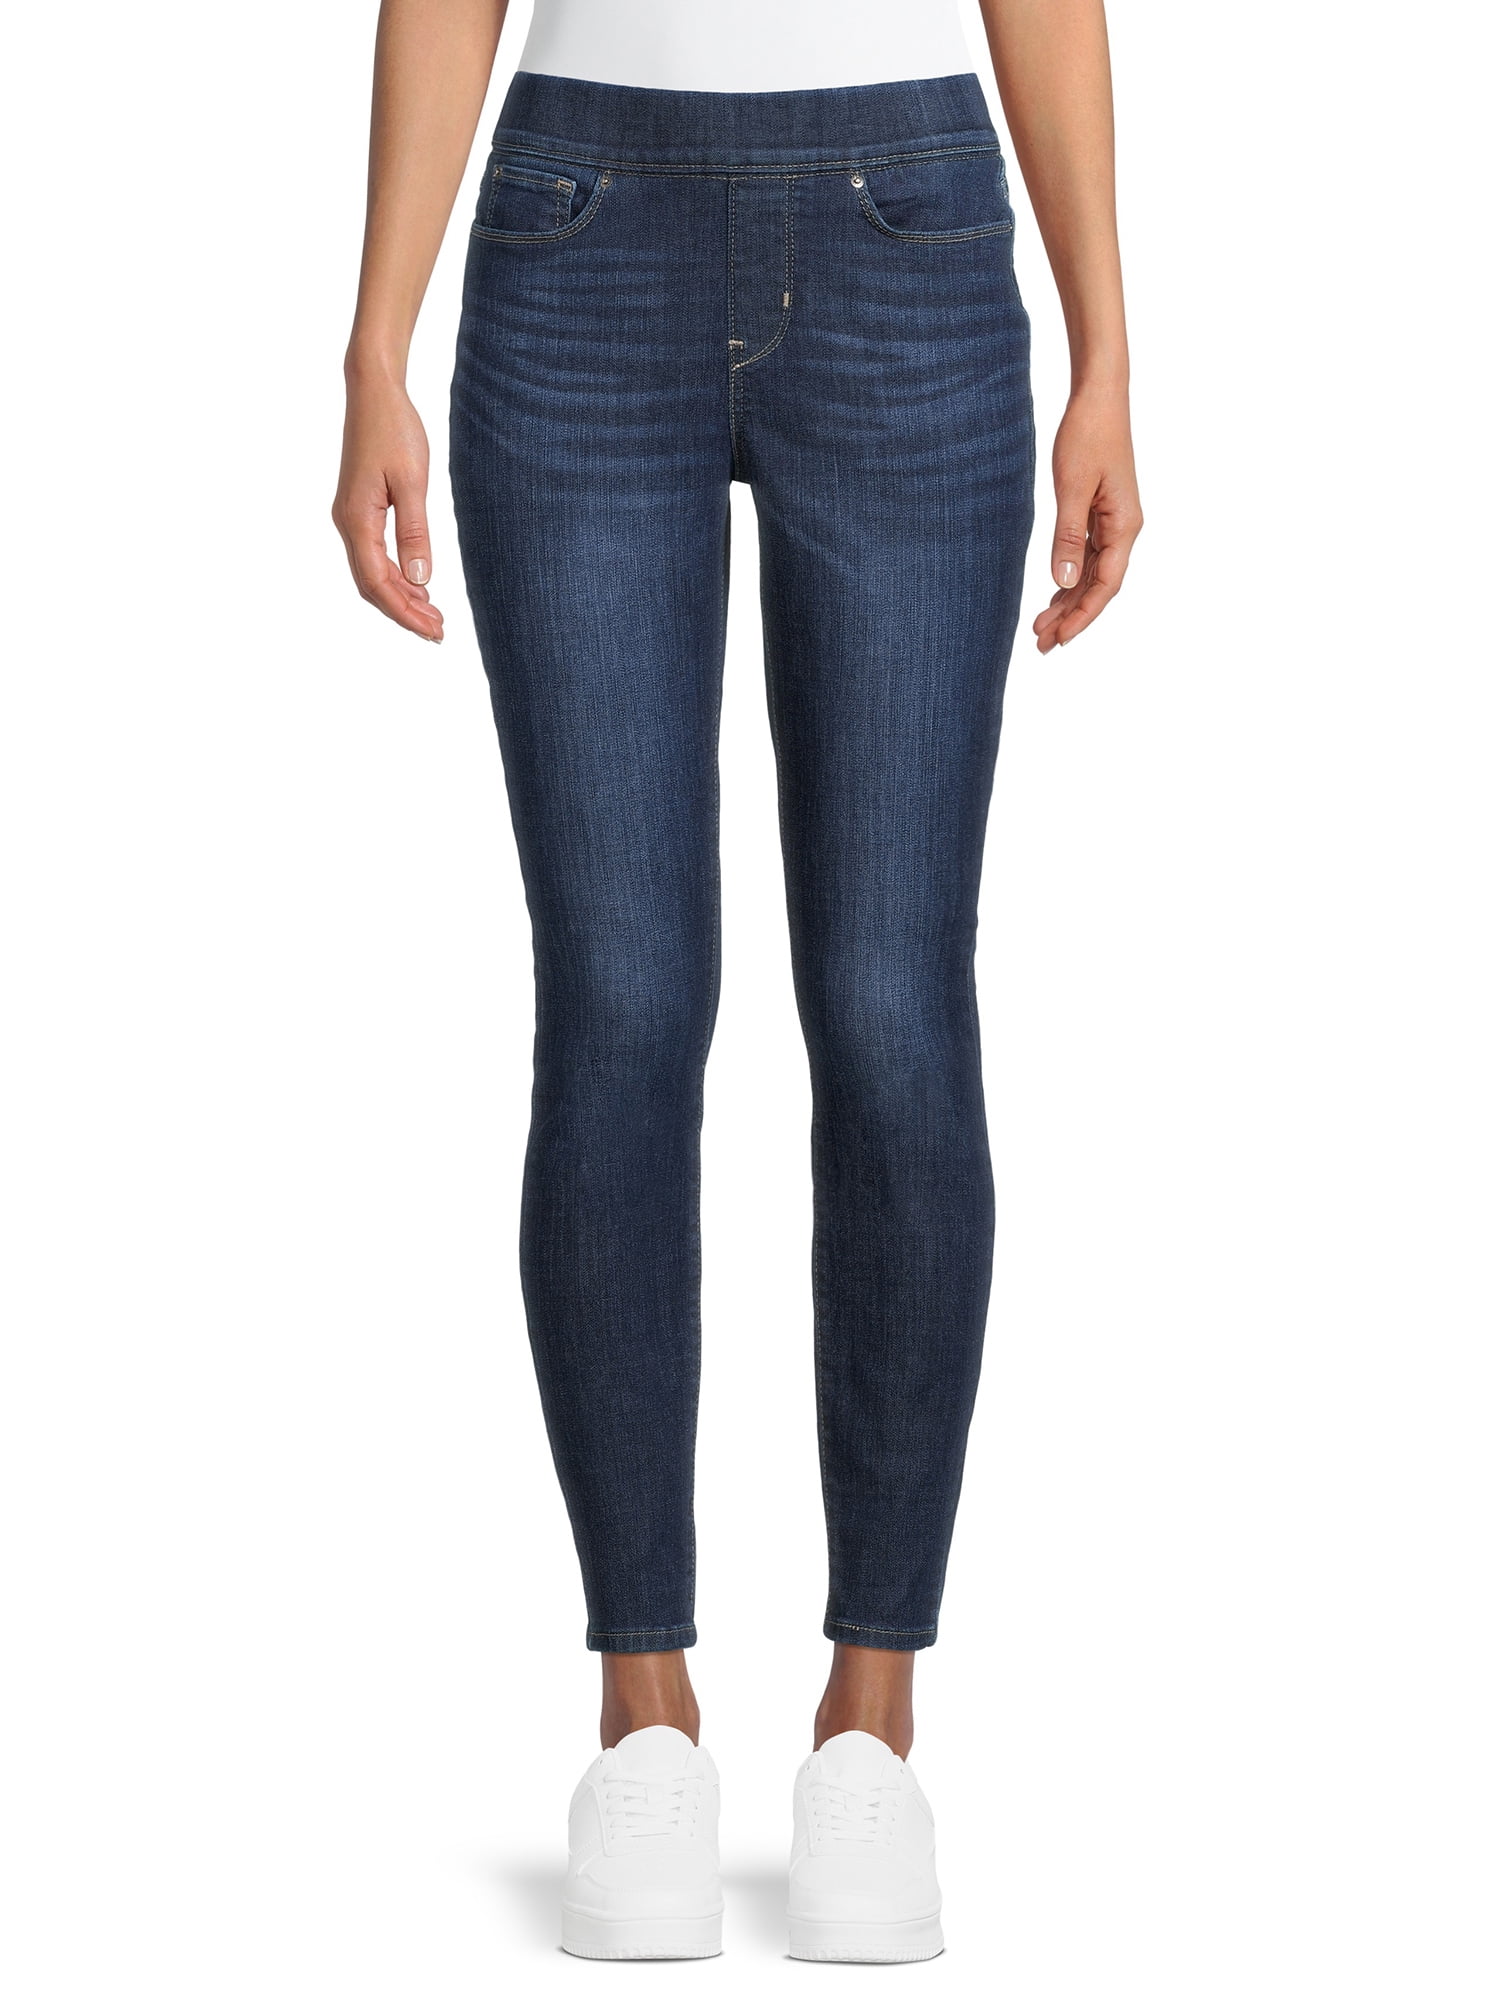 Signature by Levi Strauss & Co. Women's Shaping Pull-On Super Skinny Jeans